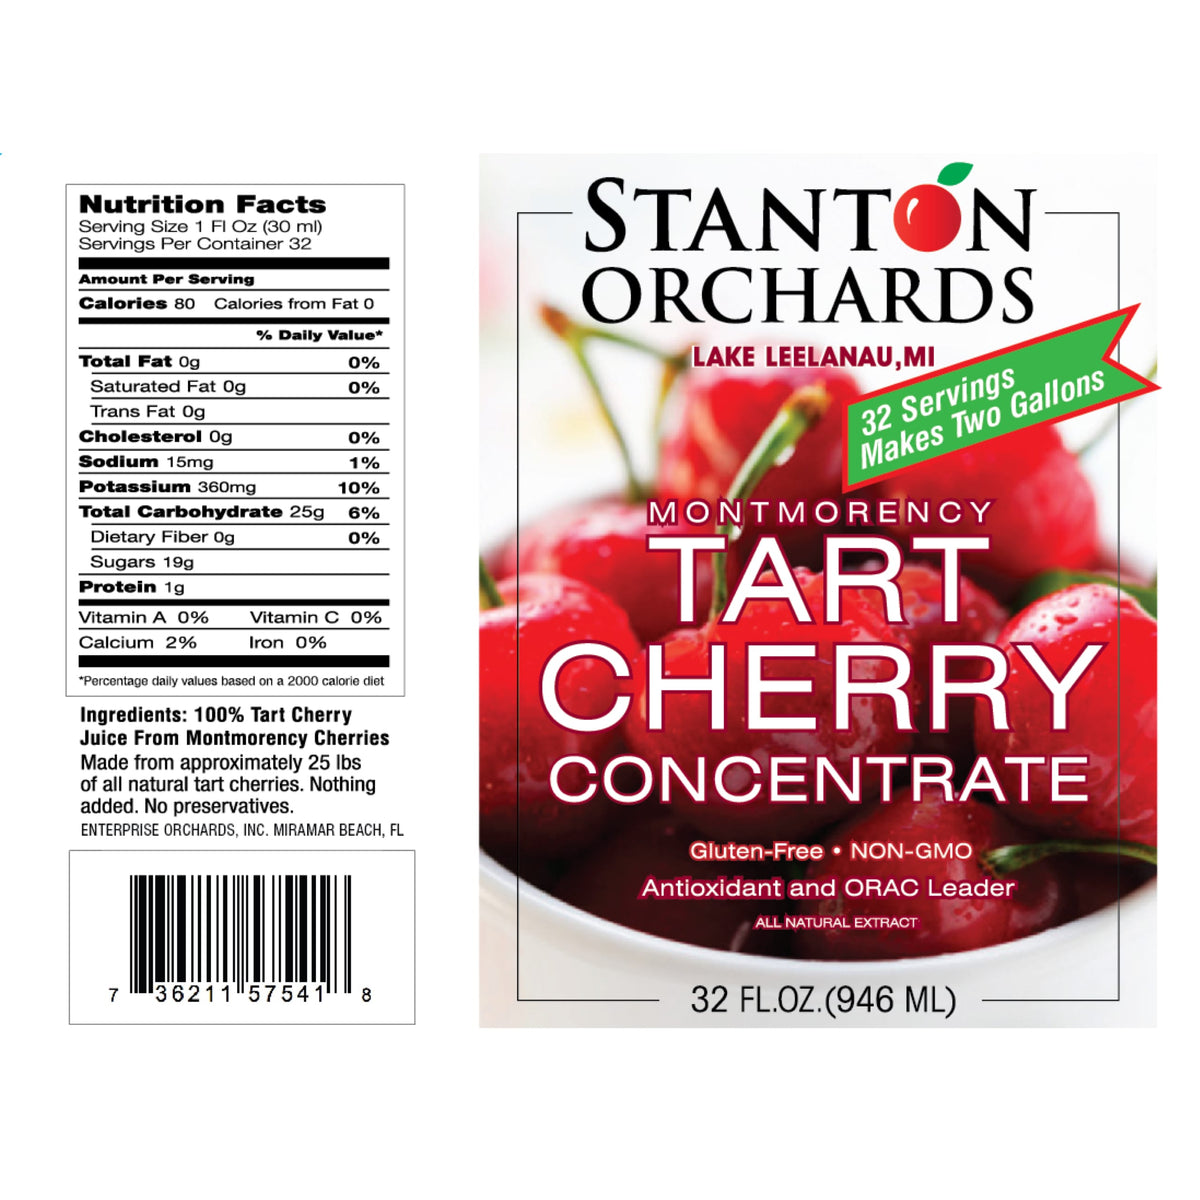 Case of Six (6) 32 oz. Bottles of Tart Cherry Concentrate